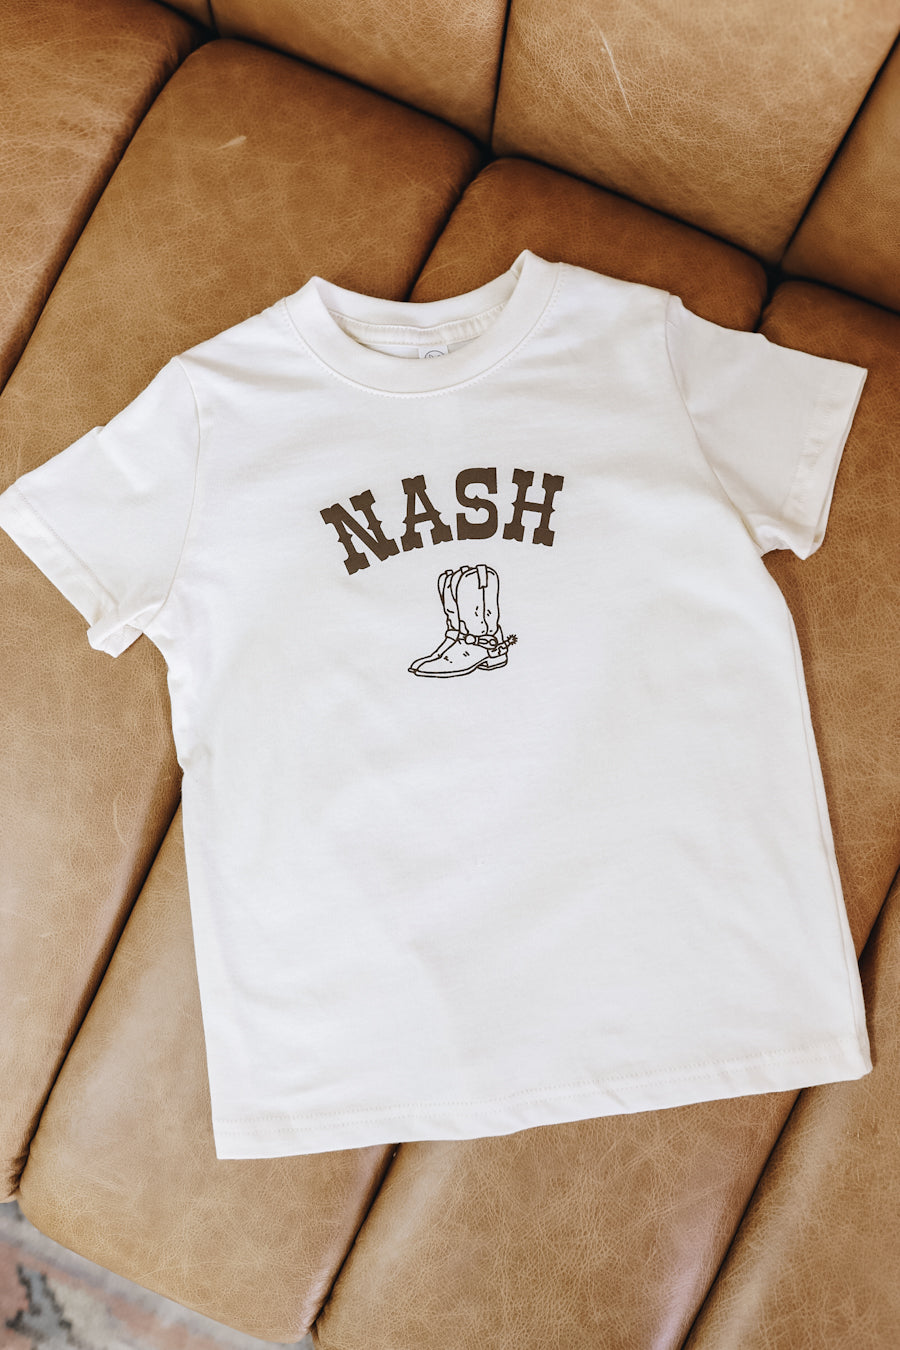 NASH western font with boot design toddler + youth tee!